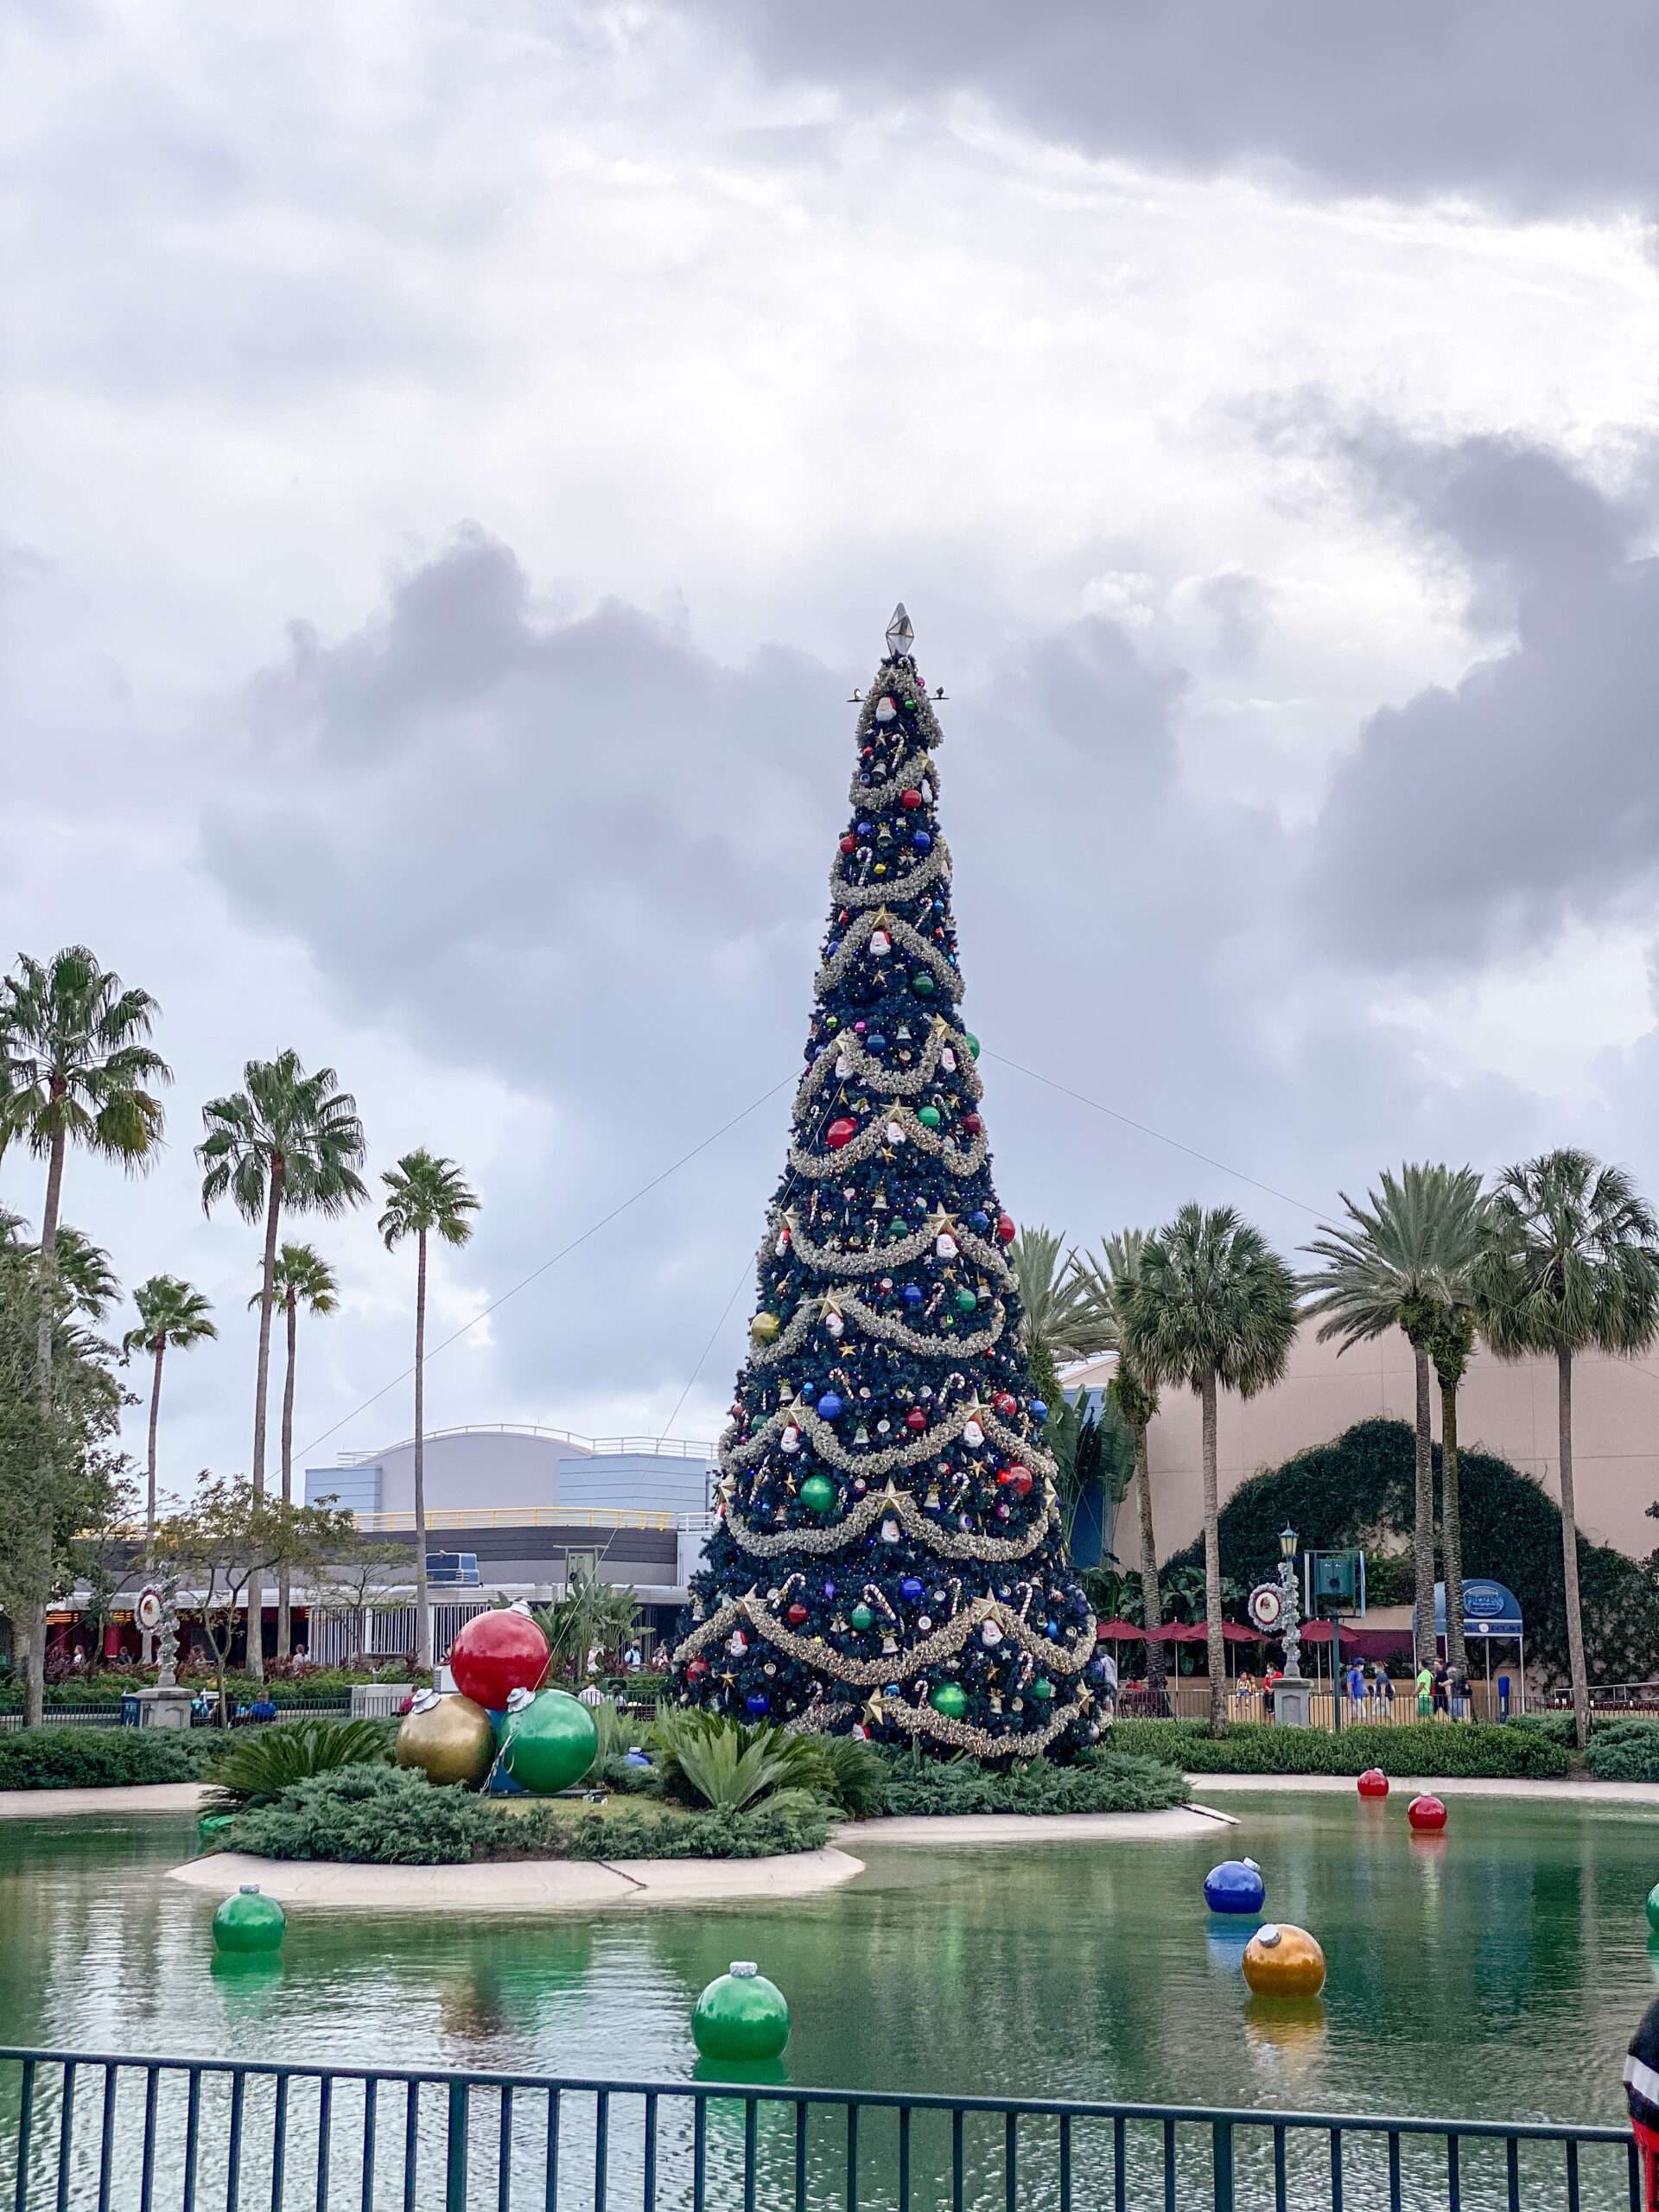 Disney during Christmas time in 2020 - My experience in Walt Disney World during a global pandemic | Magic Kingdom | Toy Story Land in Hollywood Studios | Christmas Decorations, Holiday Treats & Merchandise | Safety Measures in Place | Rides & Wait Times | Mask Requirements | Park Capacity | #Disney #DisneyWorld #MagicKingdom #HollywoodStudios #ToyStoryLand #Christmas #ChristmasDecorations #ChristmasinDisney